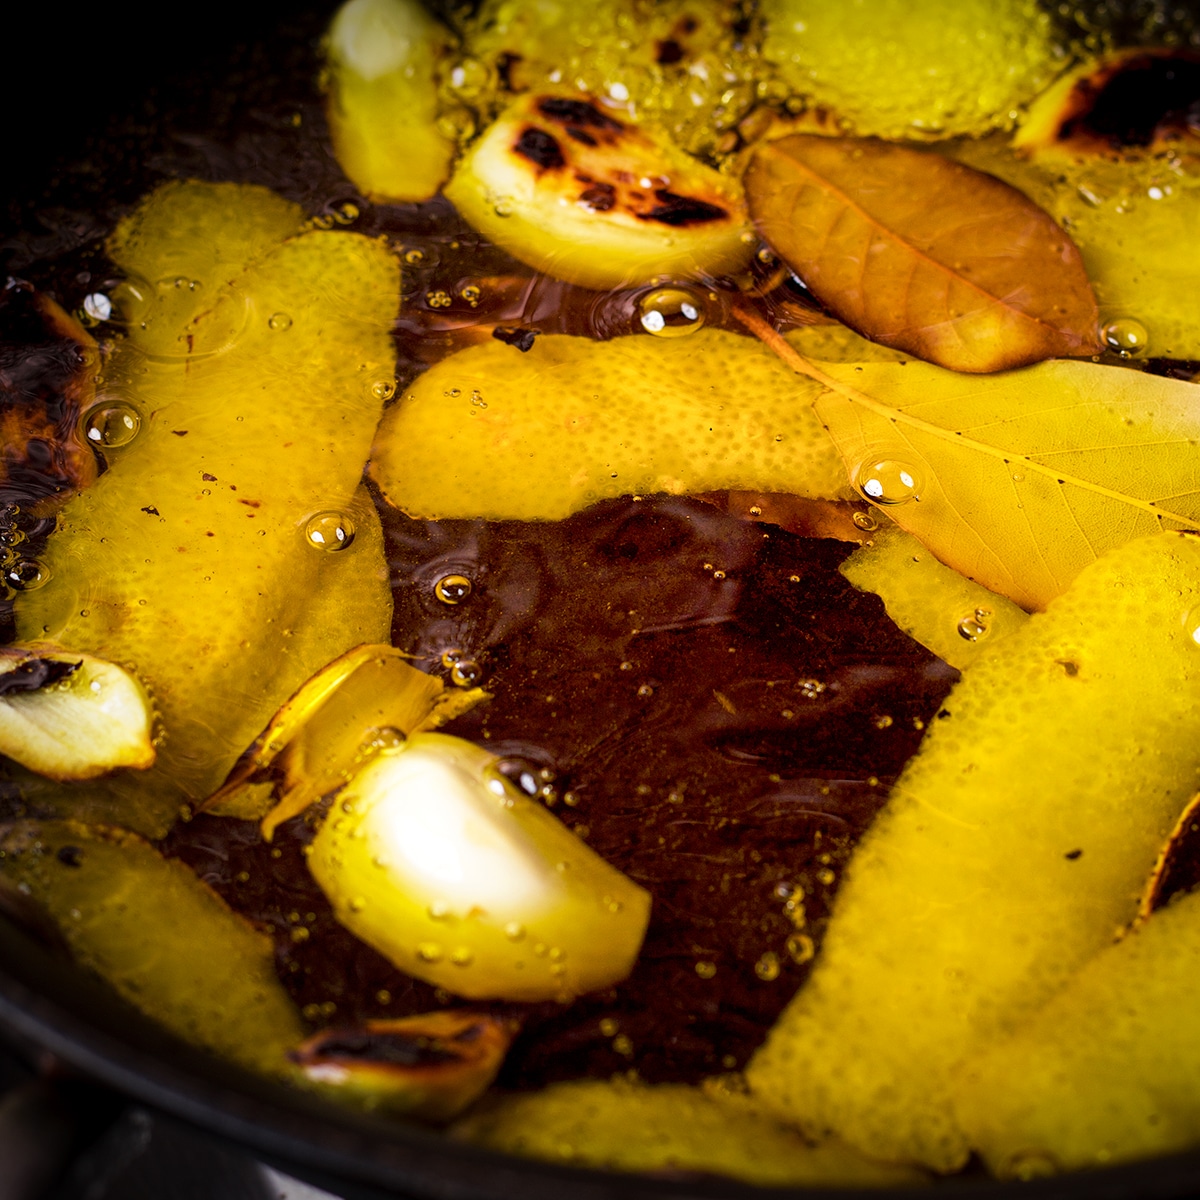 Pouring olive oil into the skillet with garlic, lemon peel, and bay leaves.